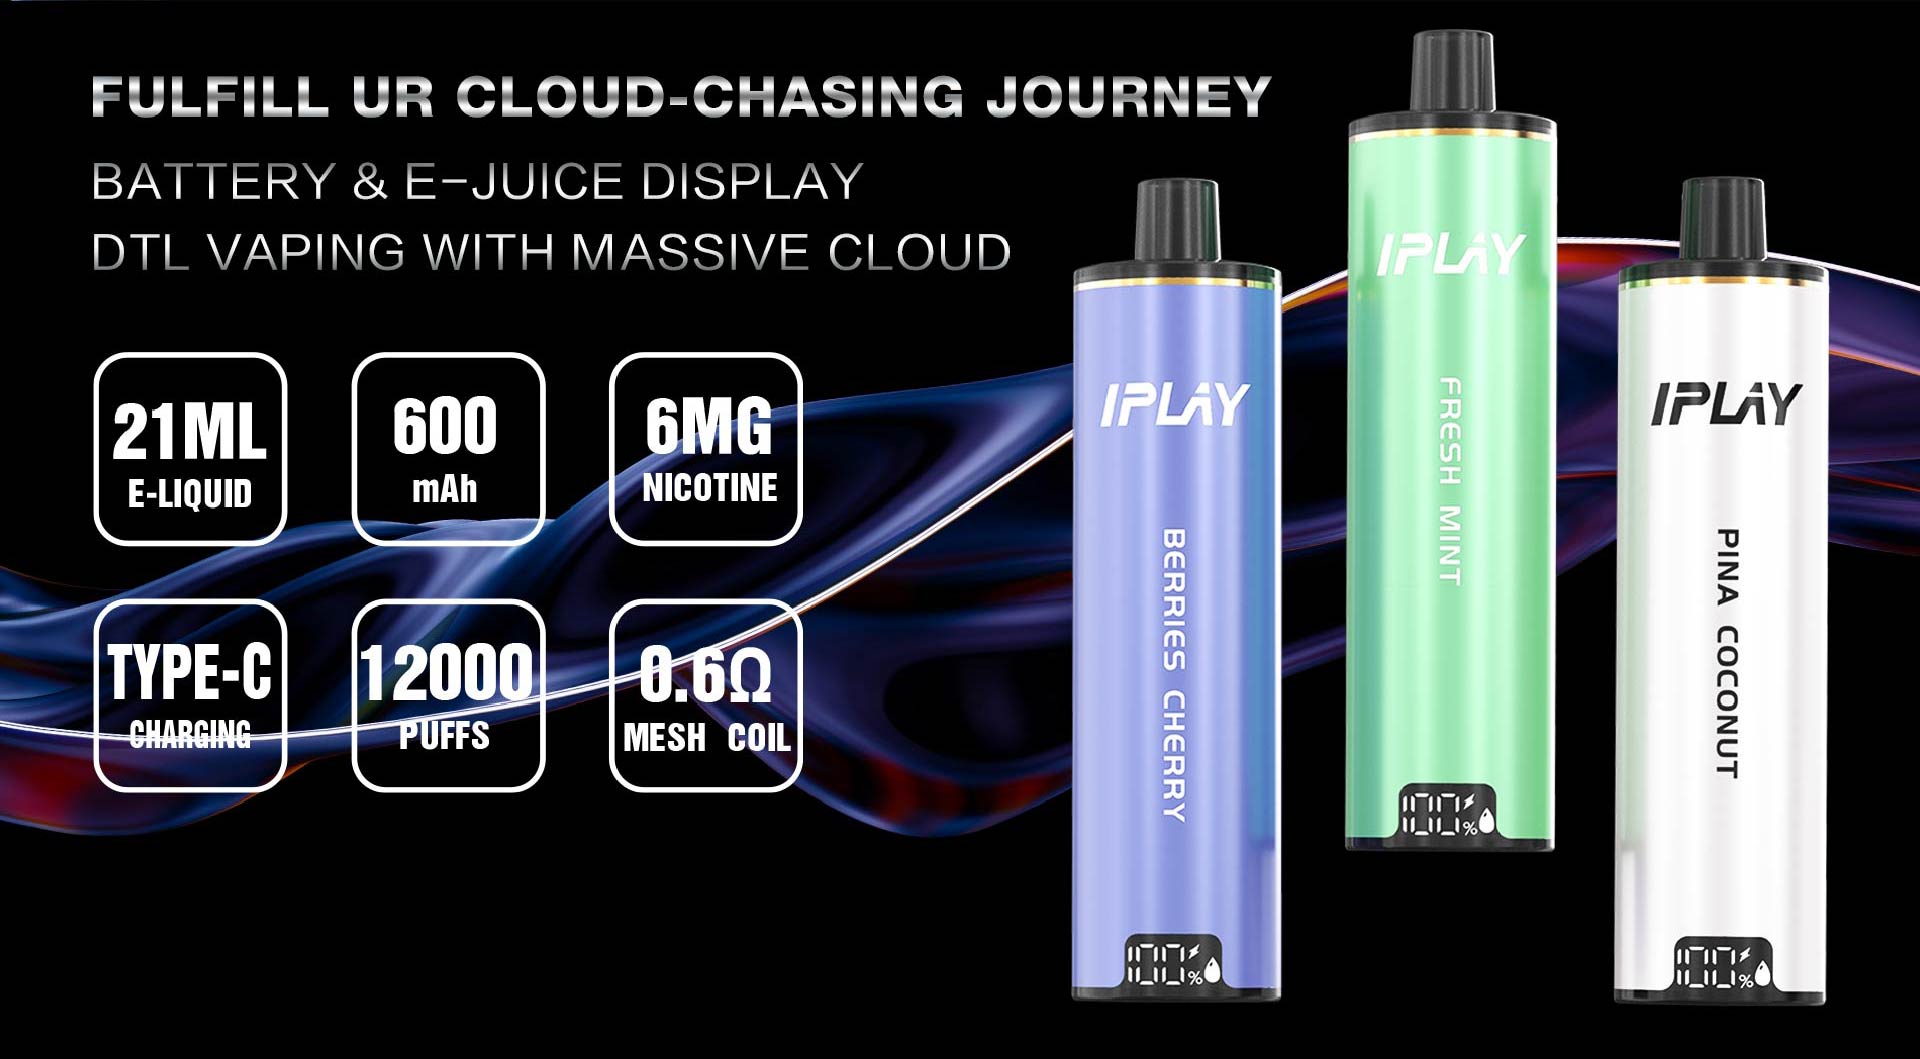 IPLAY CLOUD PRO 12000 DISPOSABLE VAPE - SPECIFICATIONS